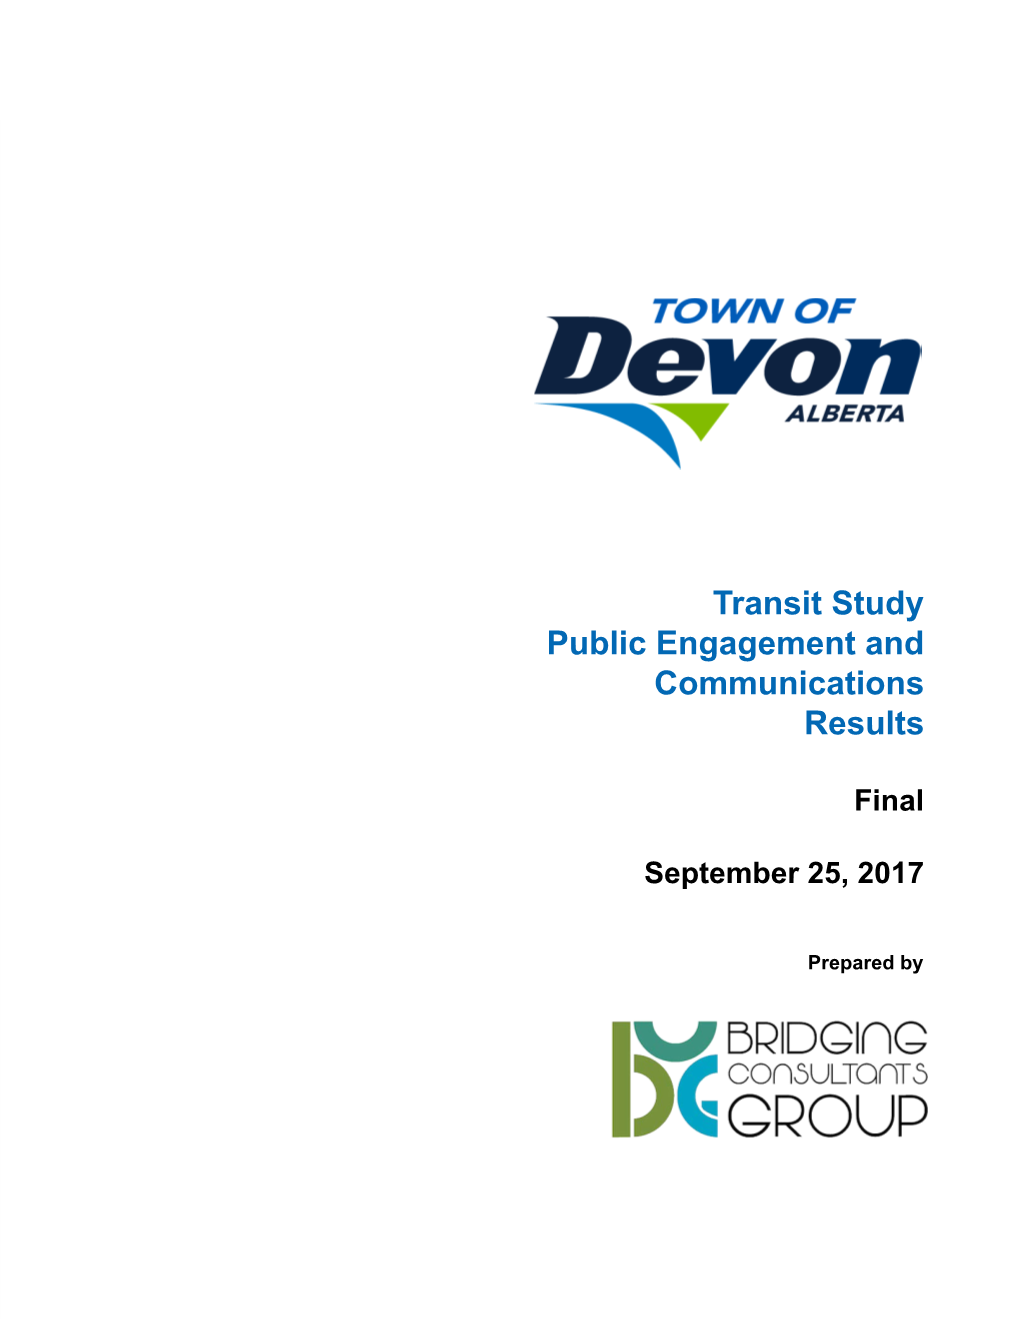 Transit Study Public Engagement and Communications Results